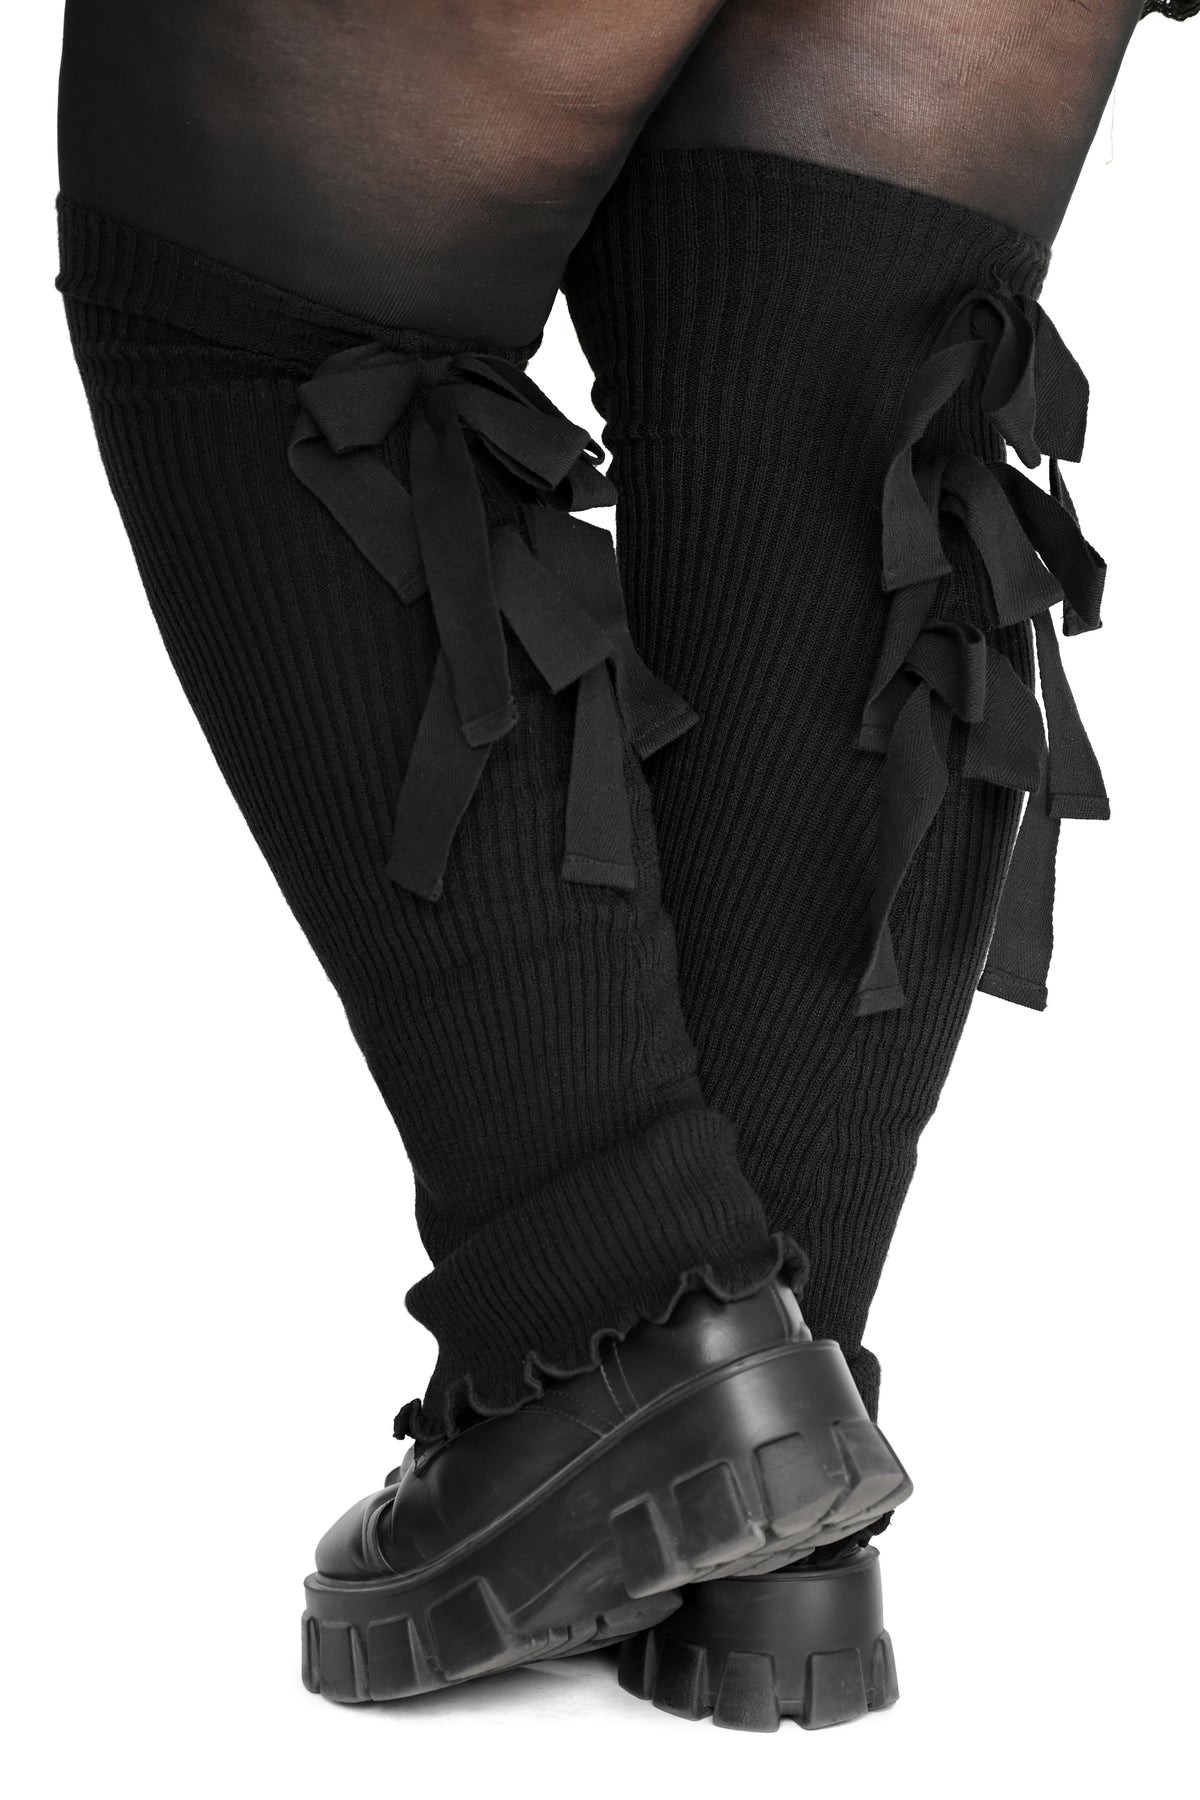 black legwarmers with 3 bows on the back